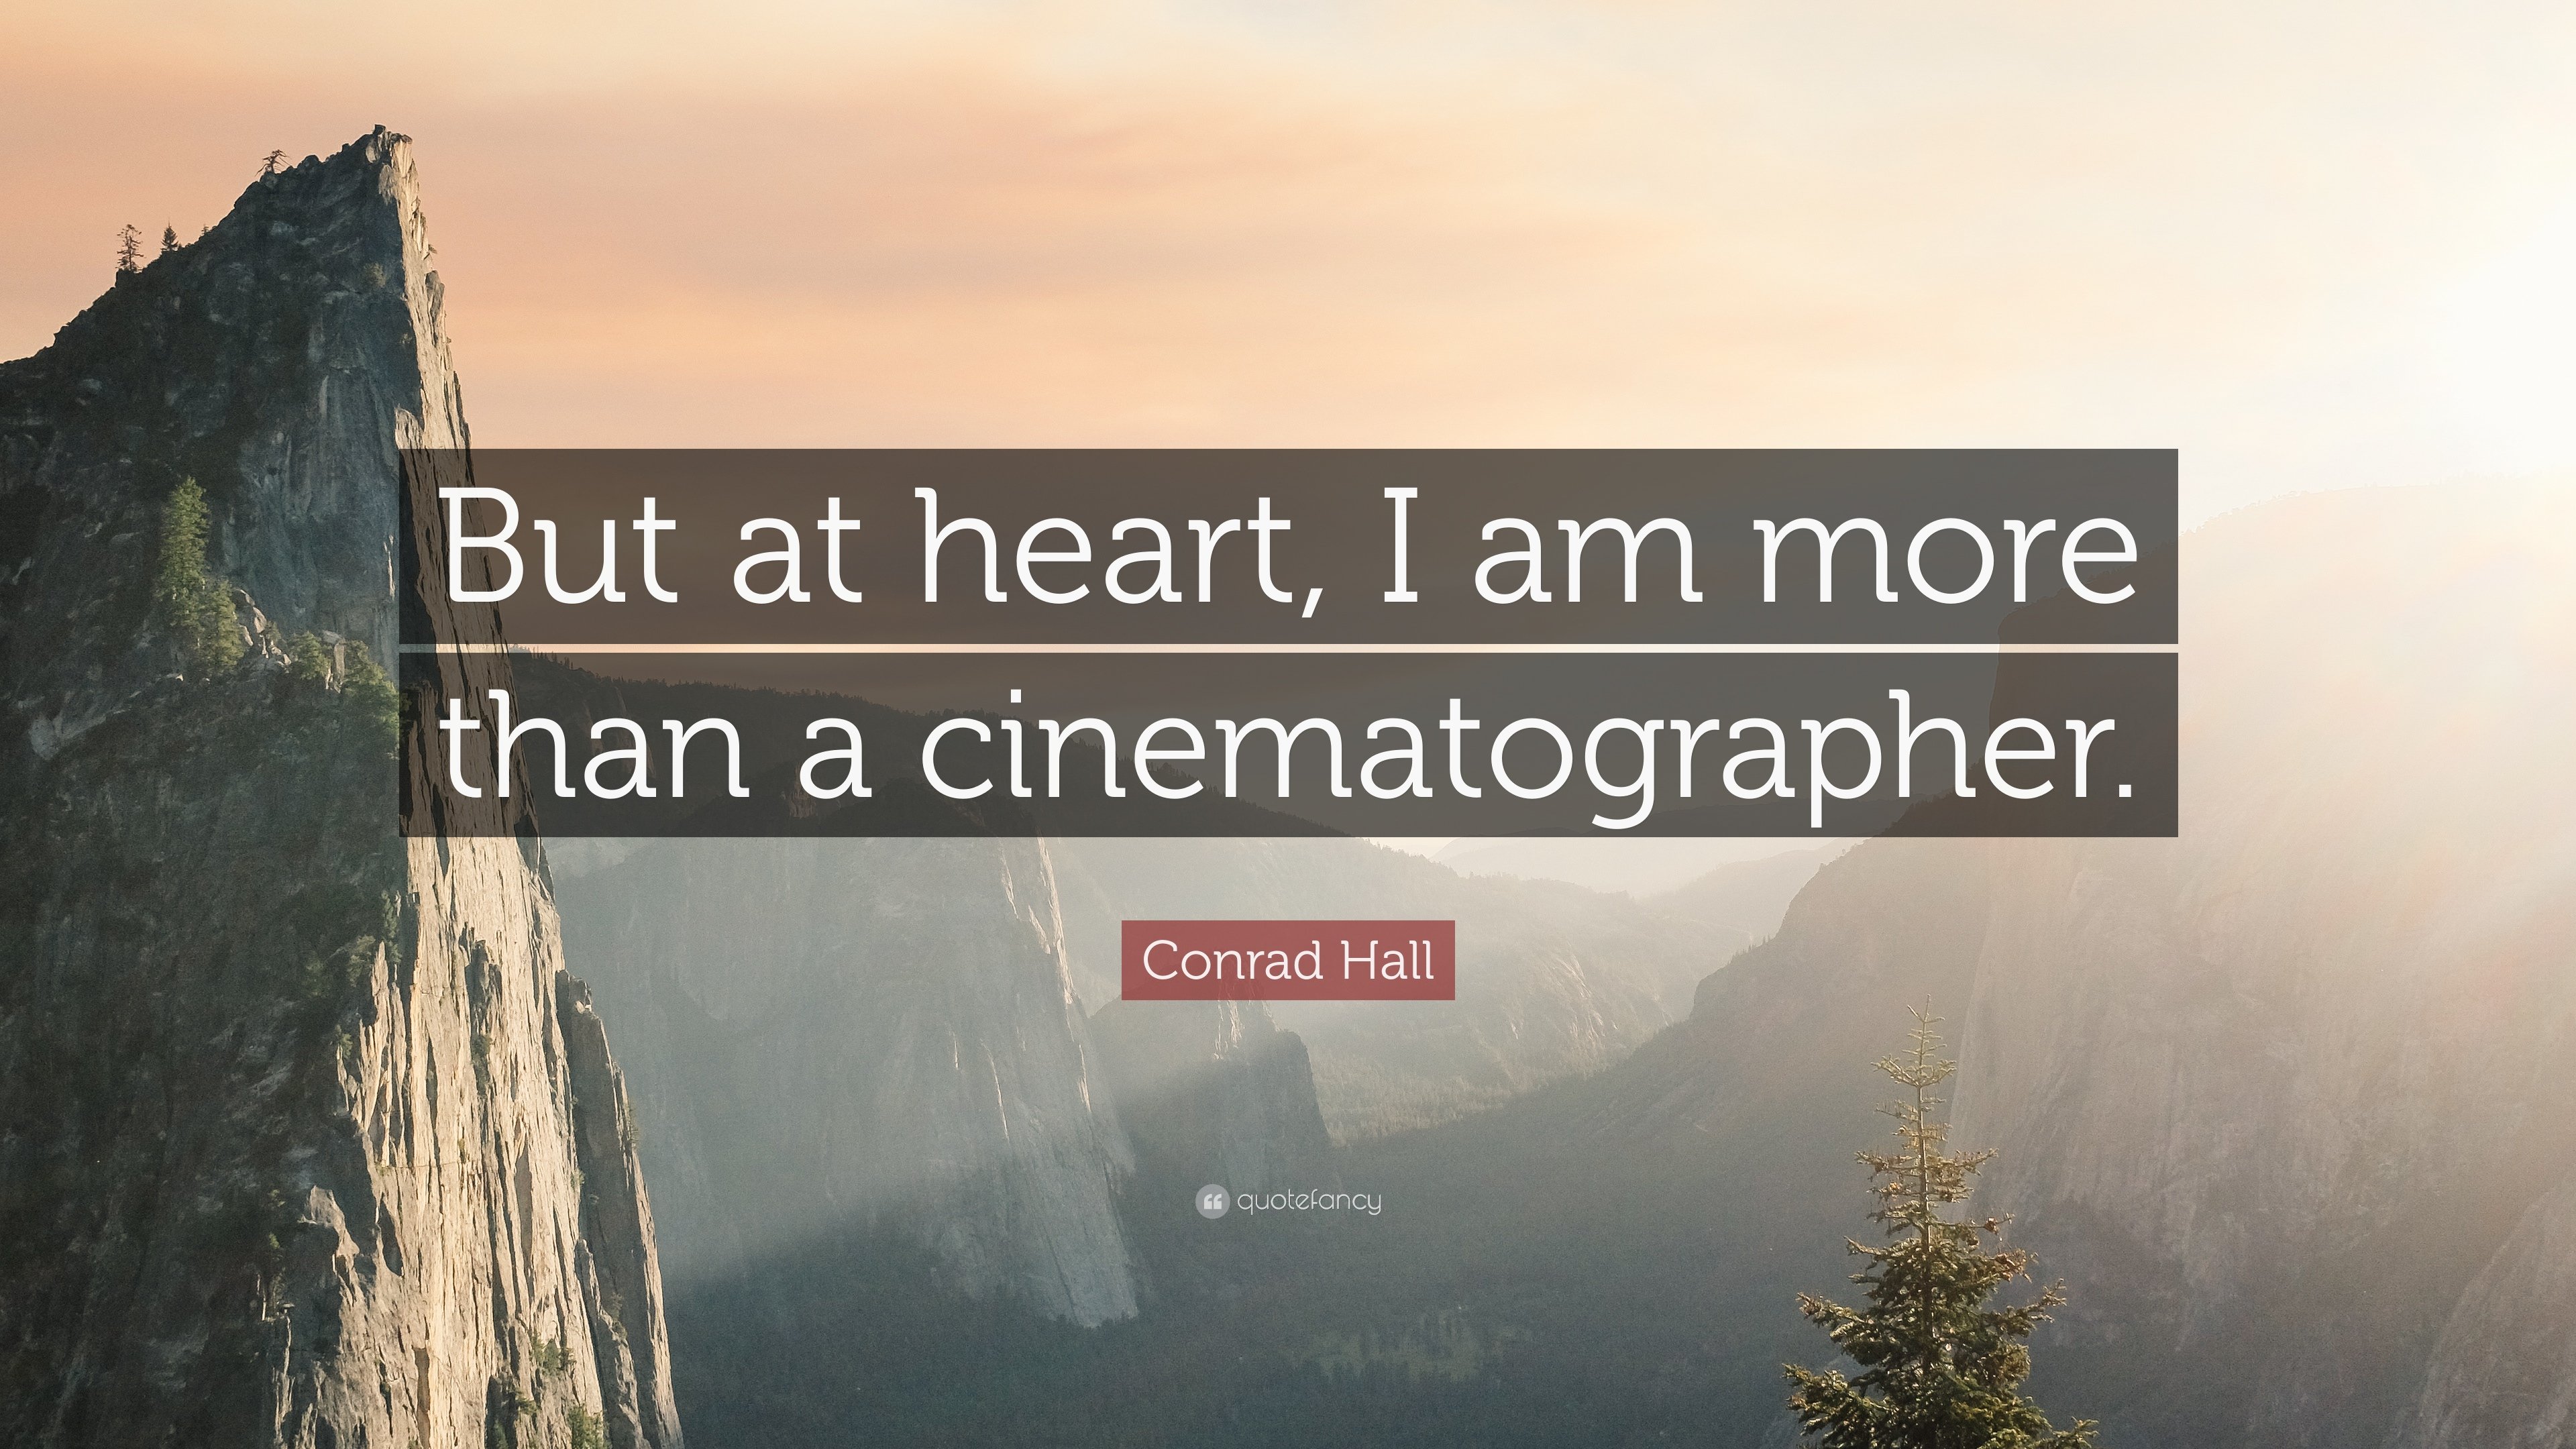 Conrad Hall Quote: “But at heart, I am more than a